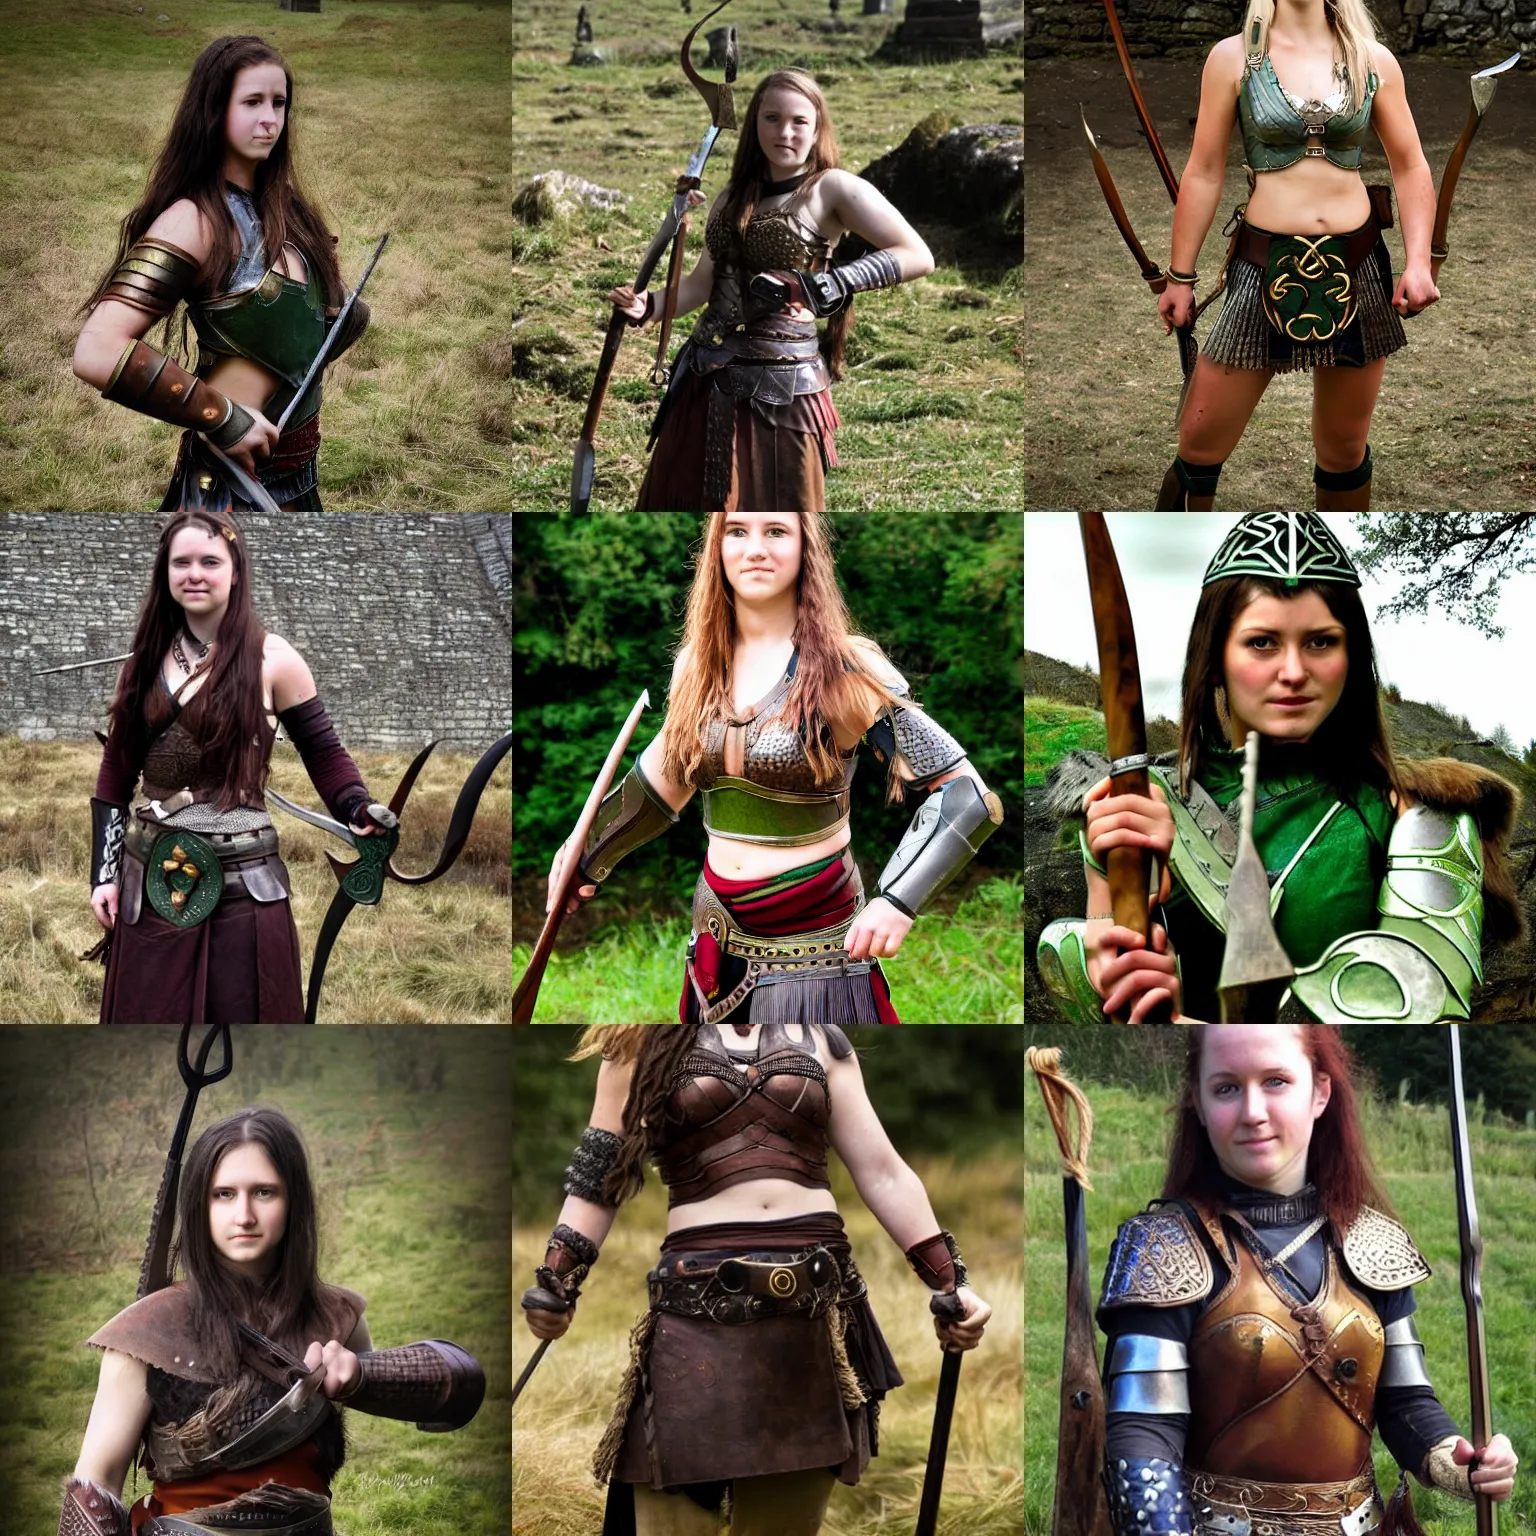 Prompt: A young female Celtic warrior